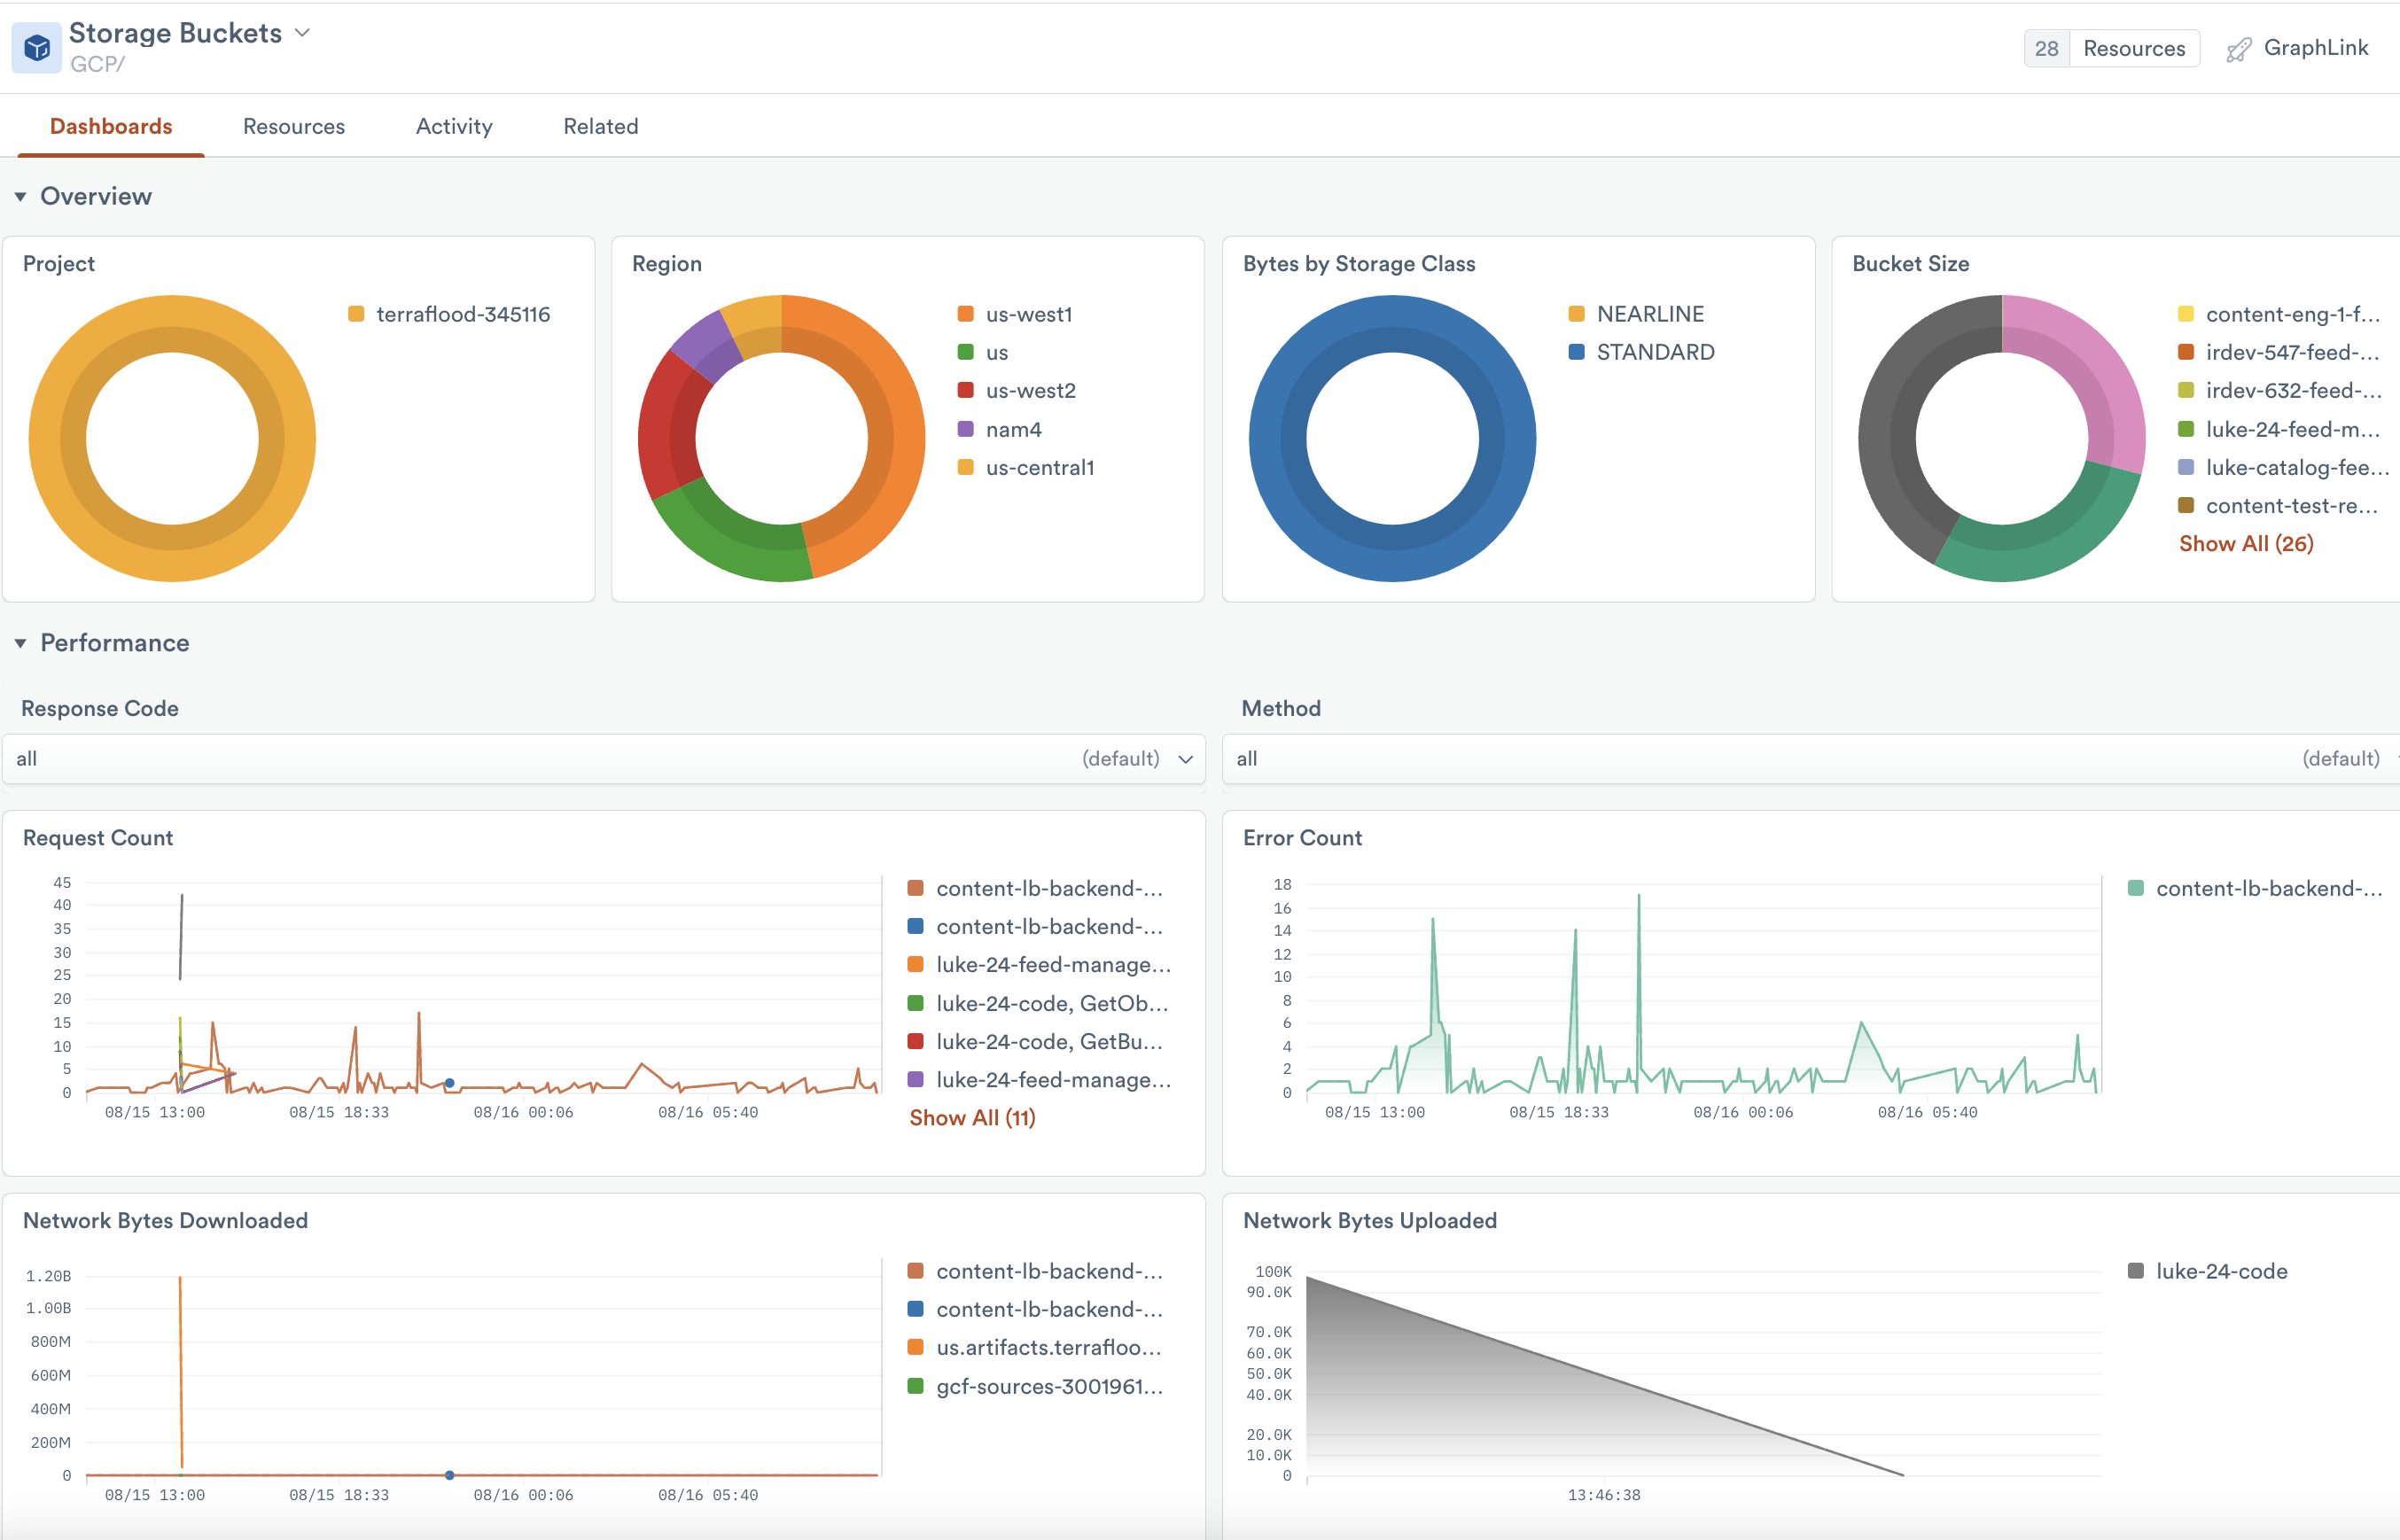 Monitoring dashboard for the Cloud Storage resource dataset.